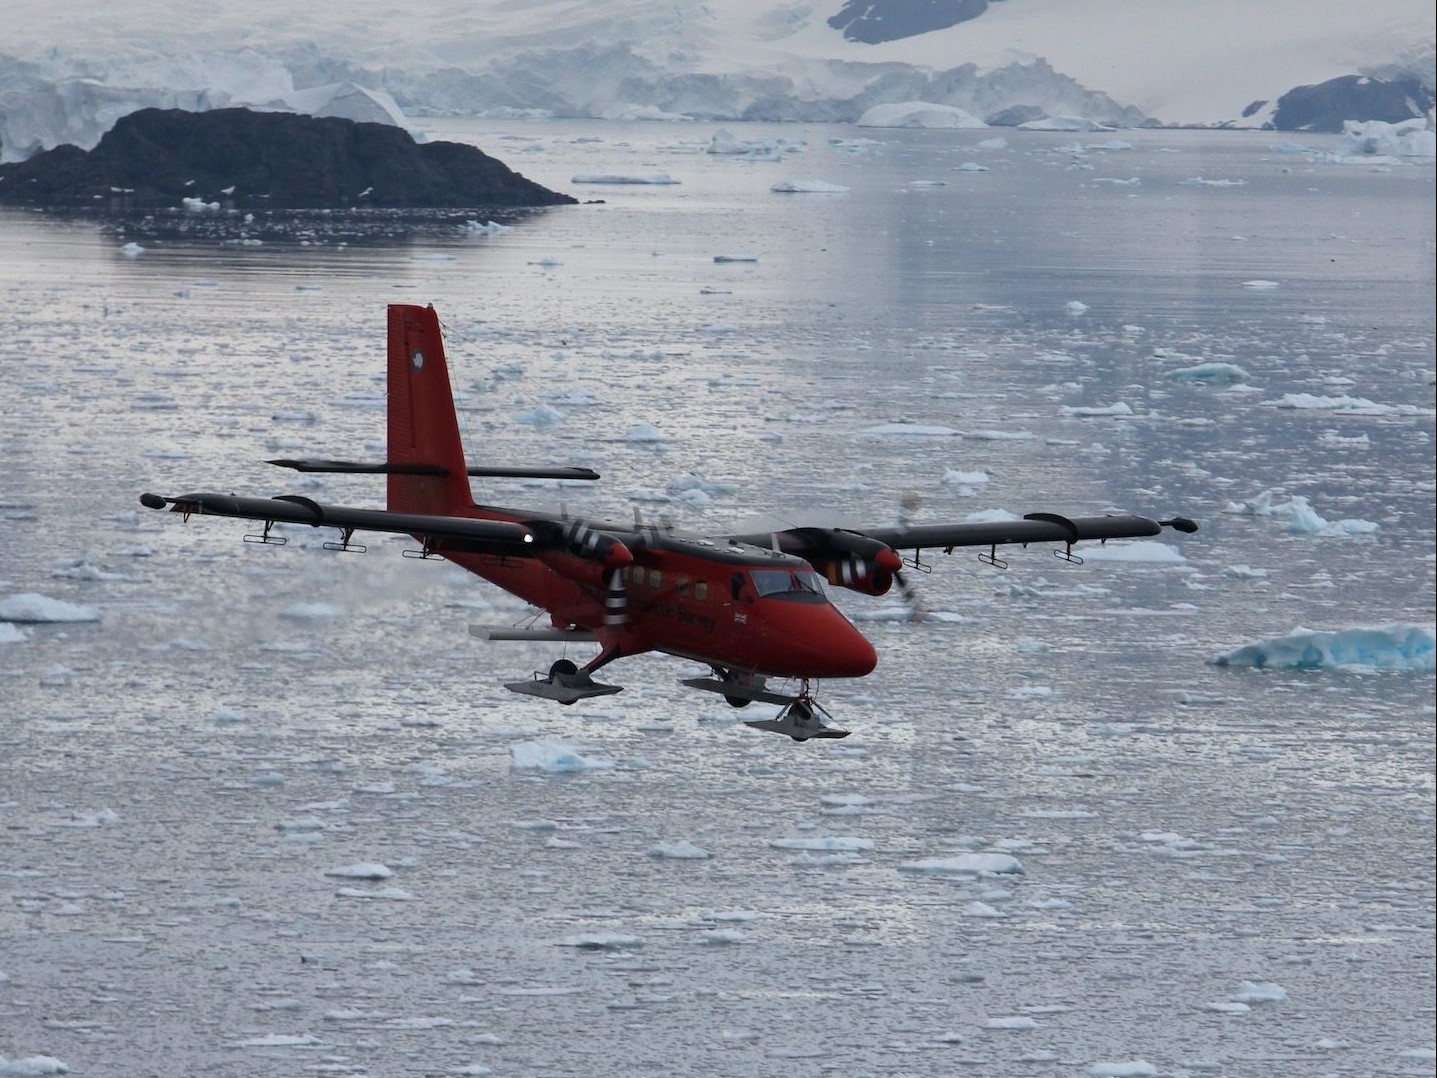 Twin Otter plane belonging to the British Antarctic Survey en route to Antarctica’s Thwaites Glacier. Credit Dave PorterLamont-Doherty Earth Observatory